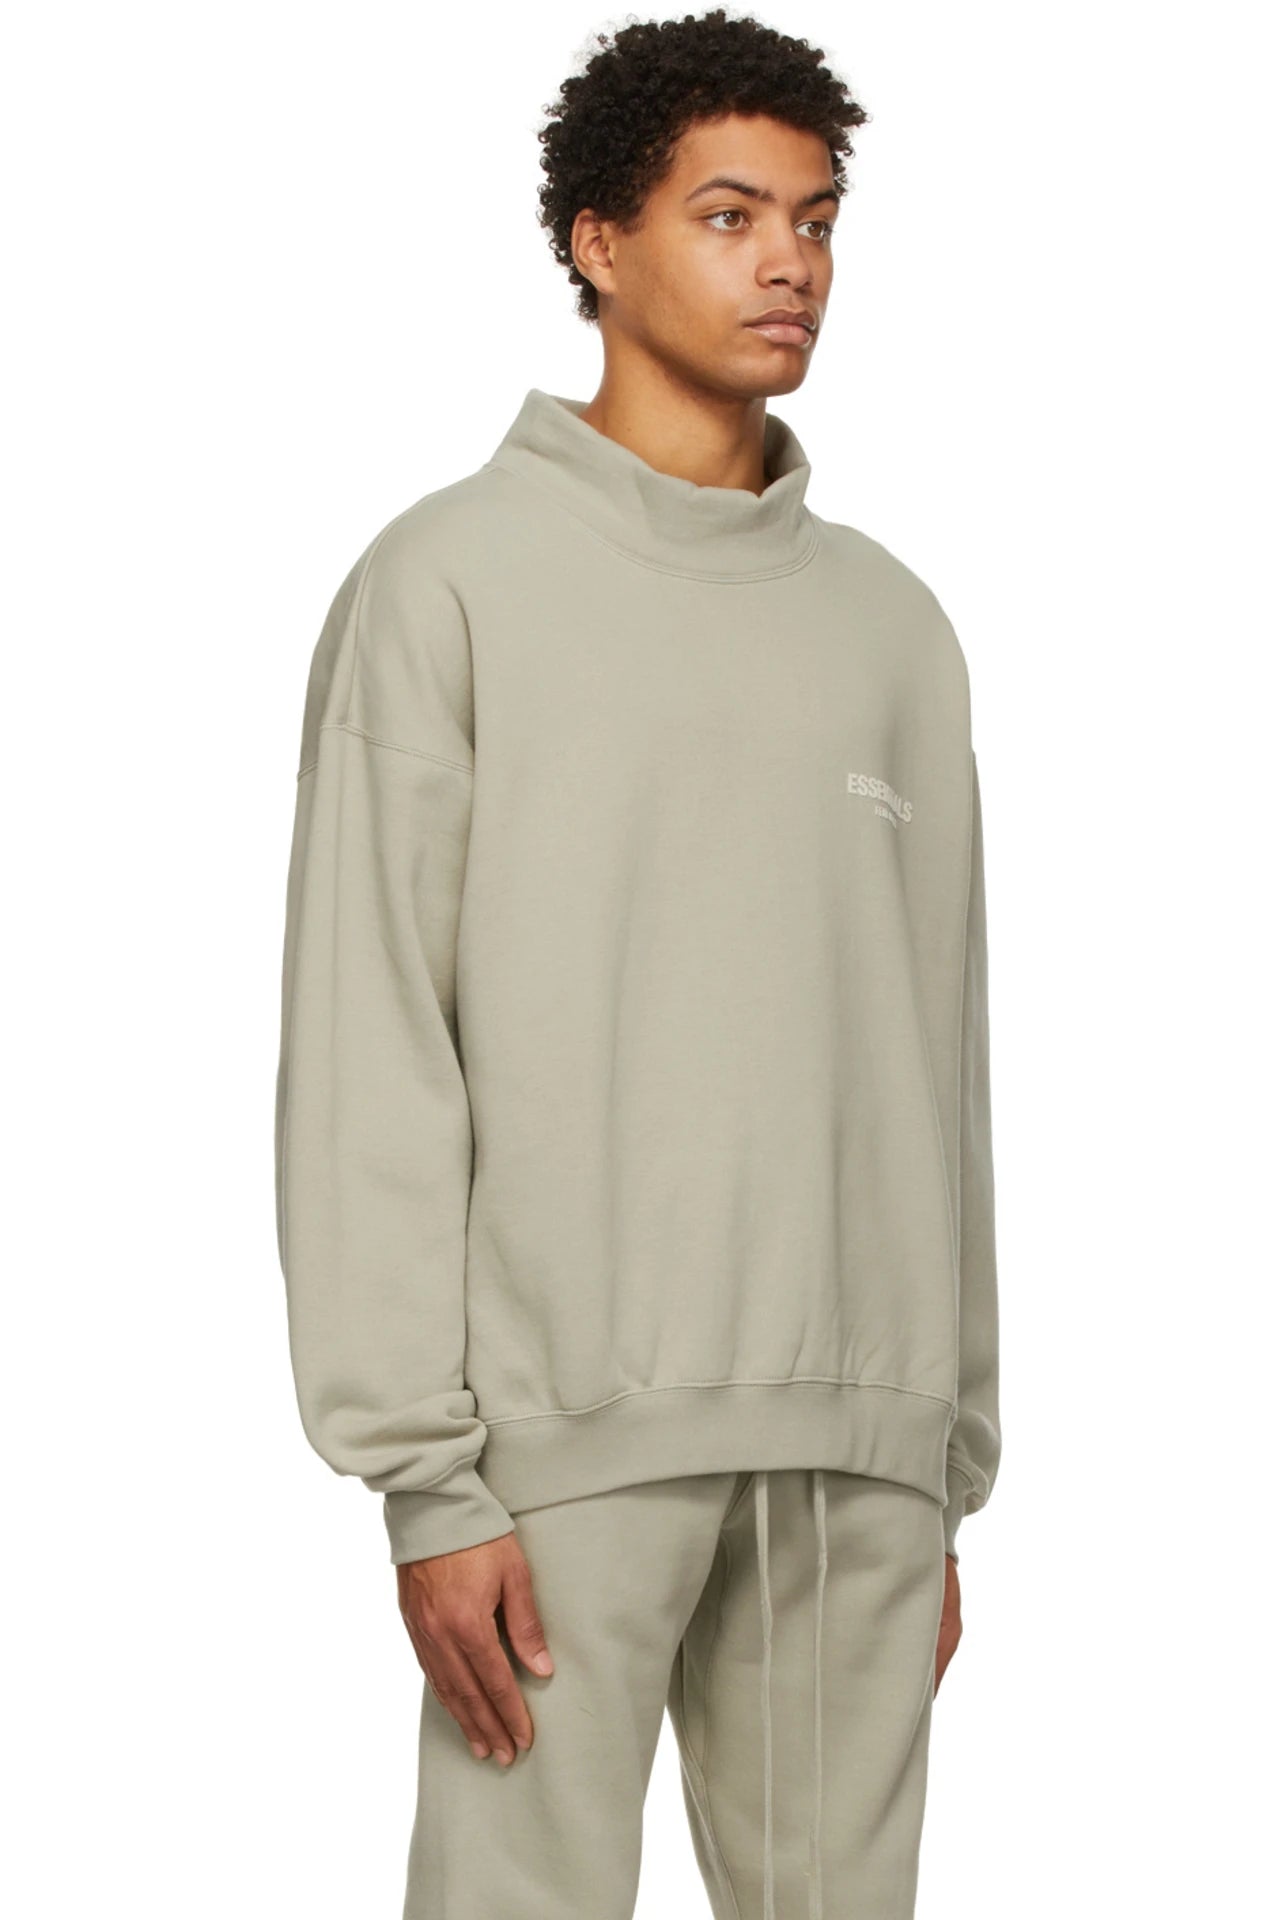 Fear of God Essentials Mock Neck Sweater Olive Green